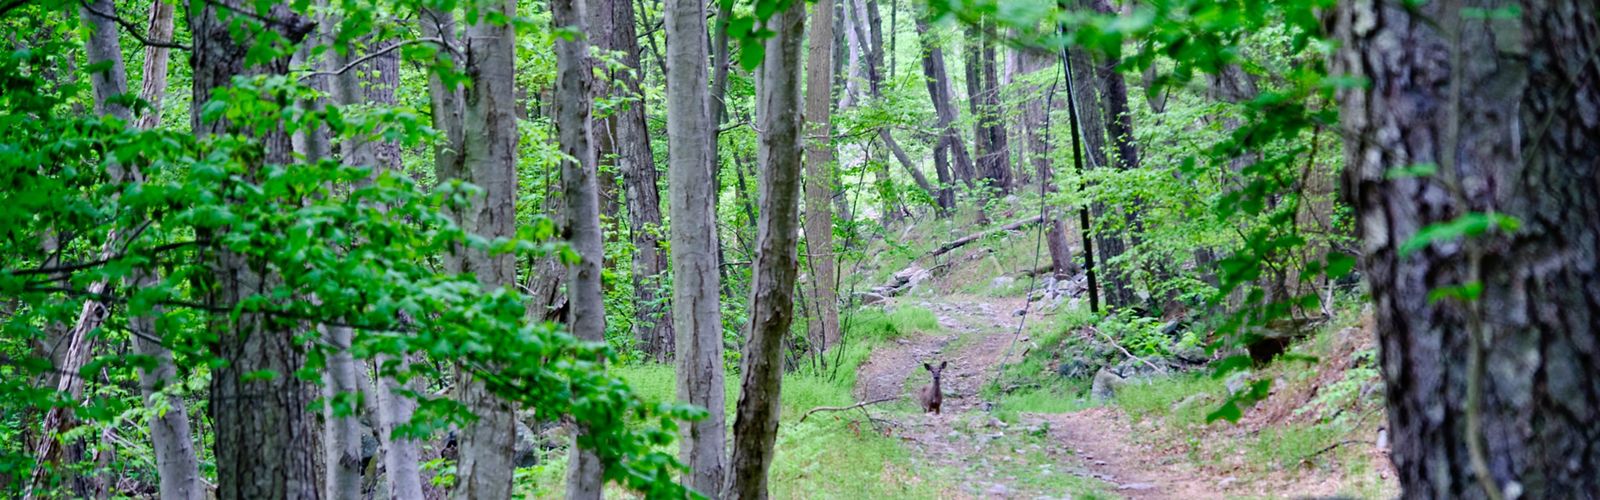 A deer stands on a trail in a forest.